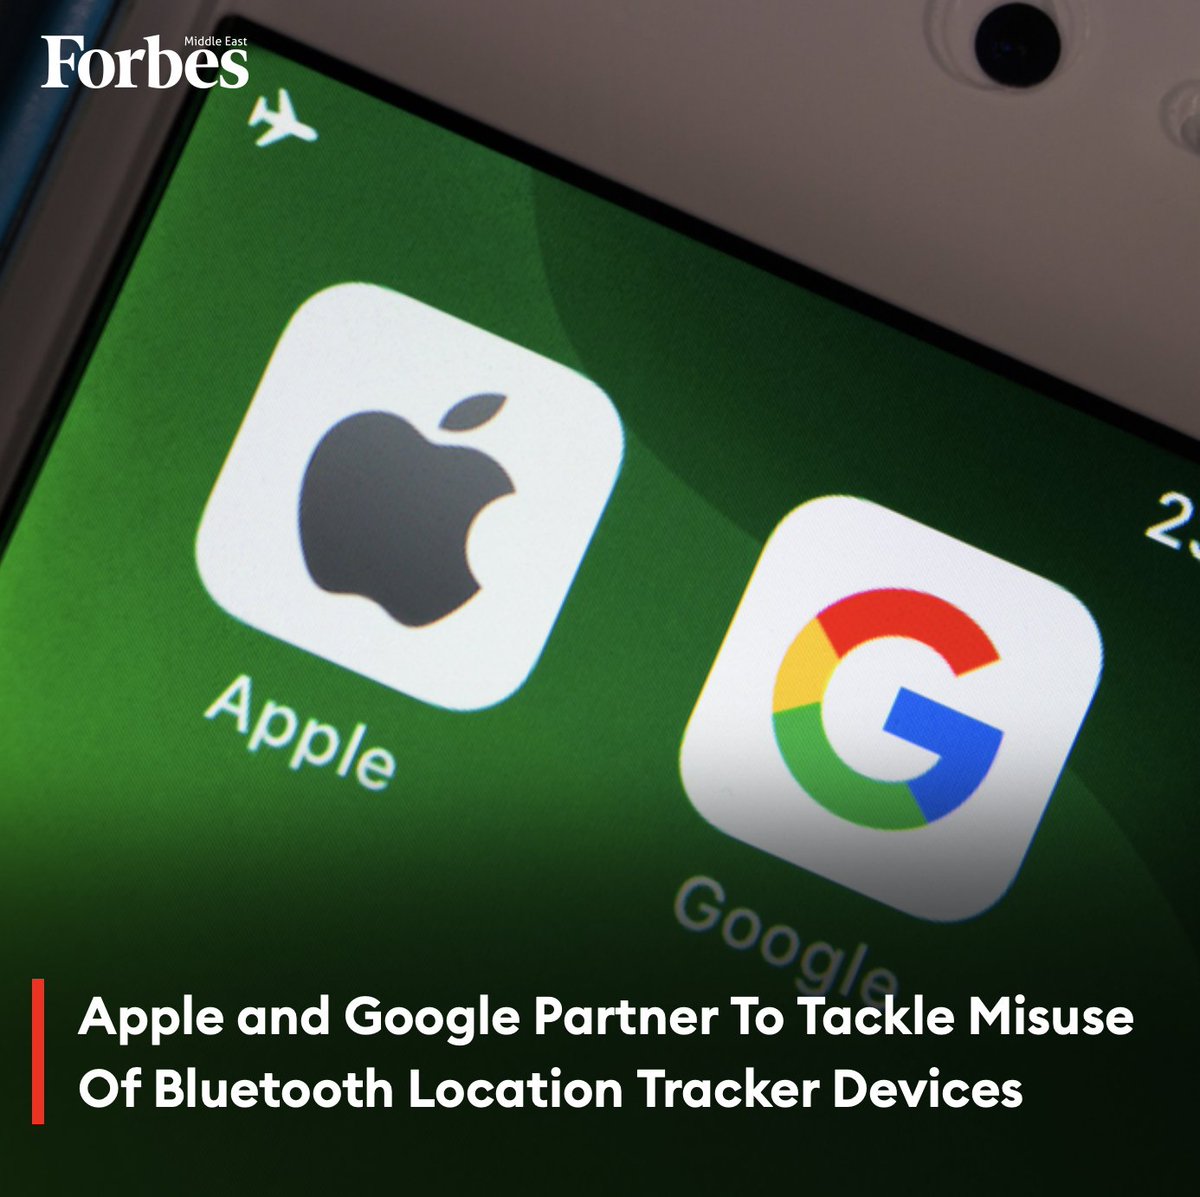 #Apple and #Google have collaborated to create a joint industry specification that alerts users on iOS and Android devices if Bluetooth tracking devices like AirTags are misused to track their movements.

#Forbes

For more details: 🔗 on.forbesmiddleeast.com/86ea